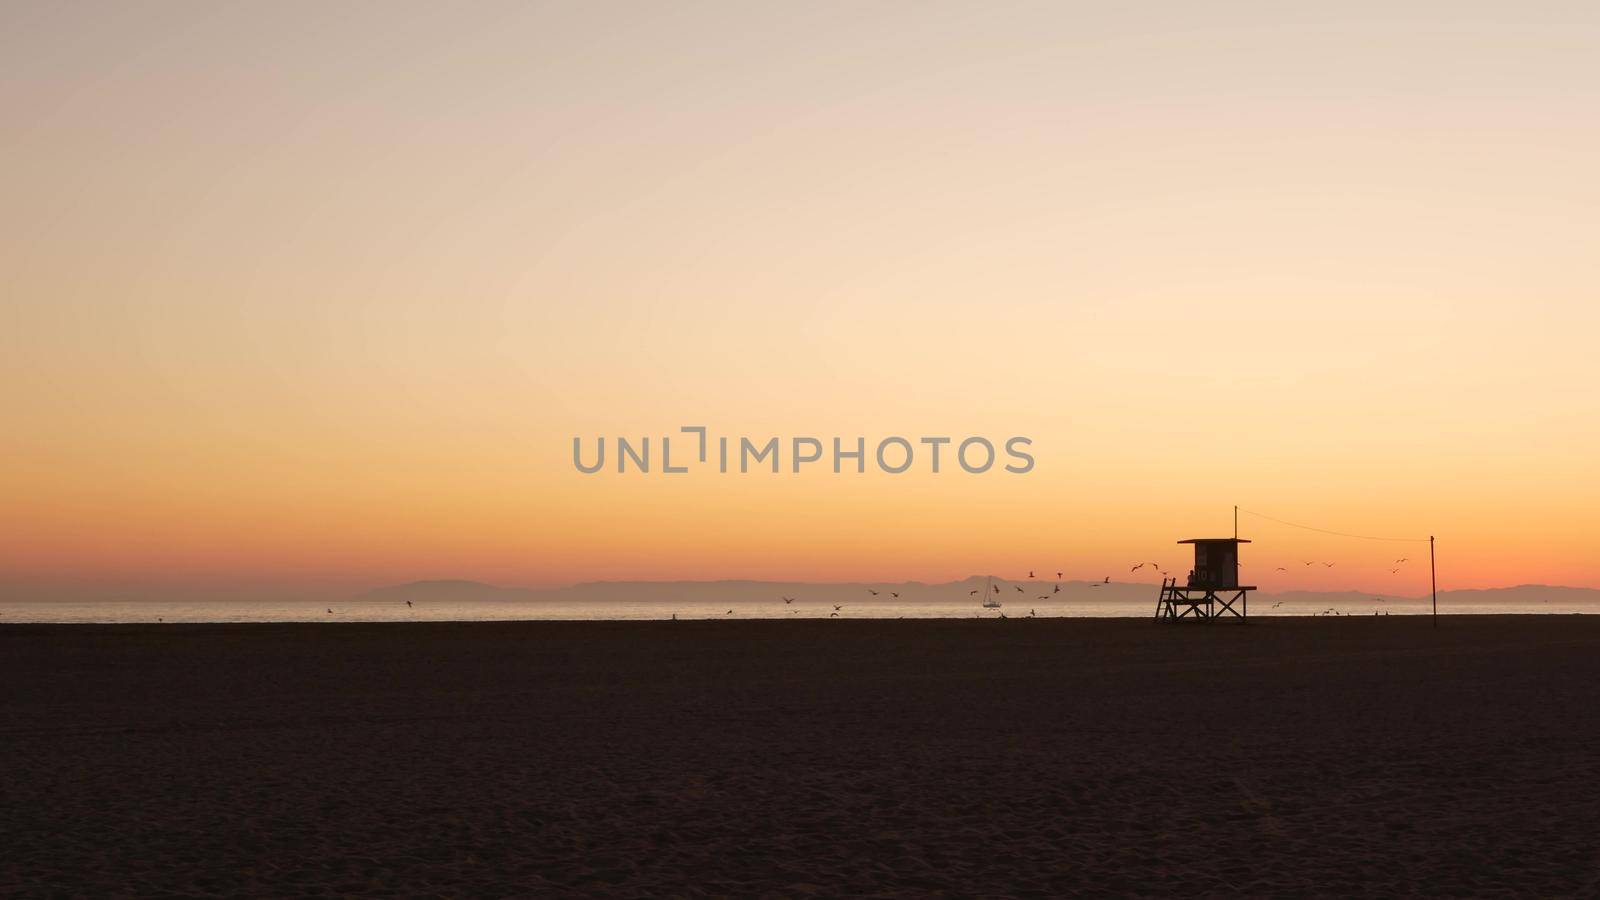 Summertime travel concept. Dark silhouette, iconic retro wooden lifeguard watch tower against sunset orange sky. Contrast watchtower outline, california pacific ocean beach twilight aesthetic, USA.